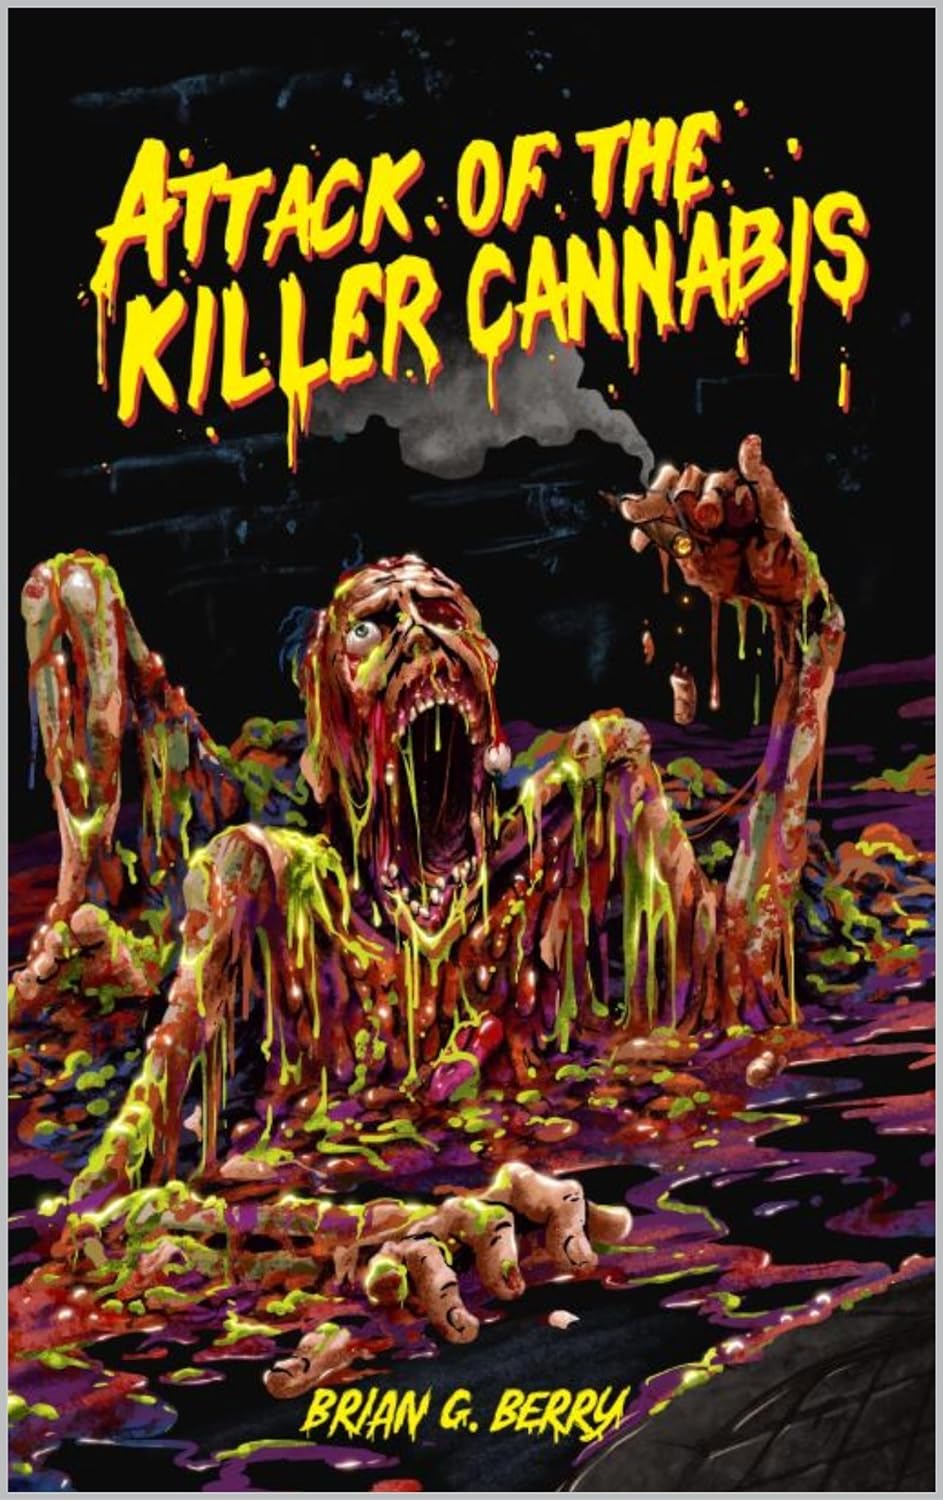 Attack of the Killer Cannabis